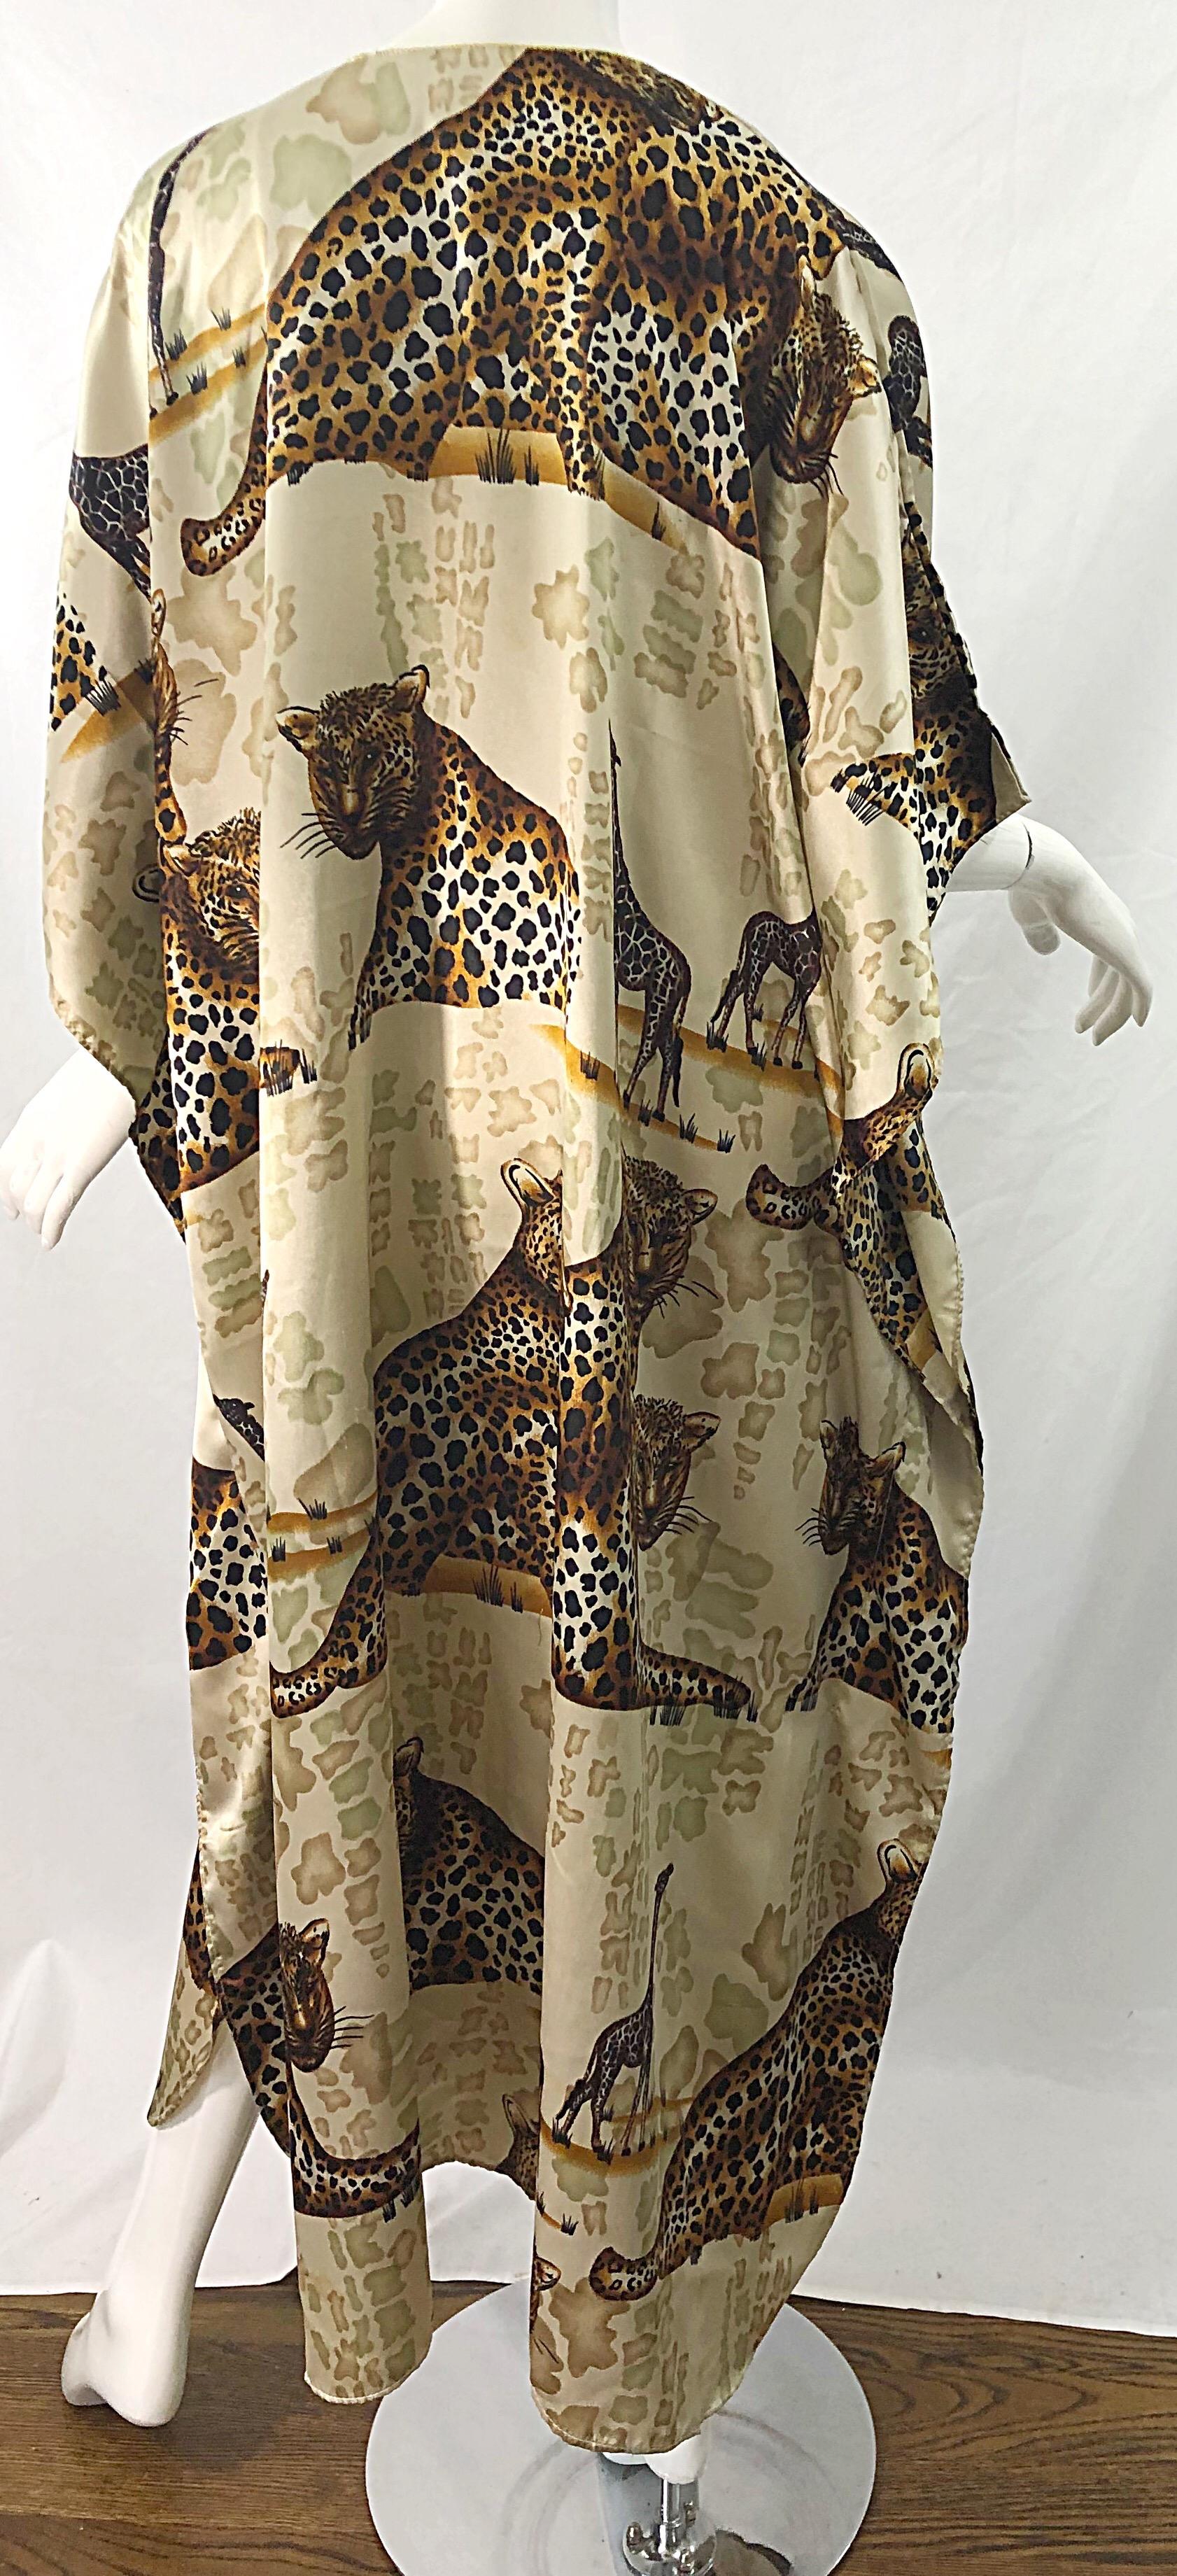 Amazing Vintage Tiger King Animal Print Silky Sequin Beaded Caftan Maxi Dress In Excellent Condition For Sale In San Diego, CA